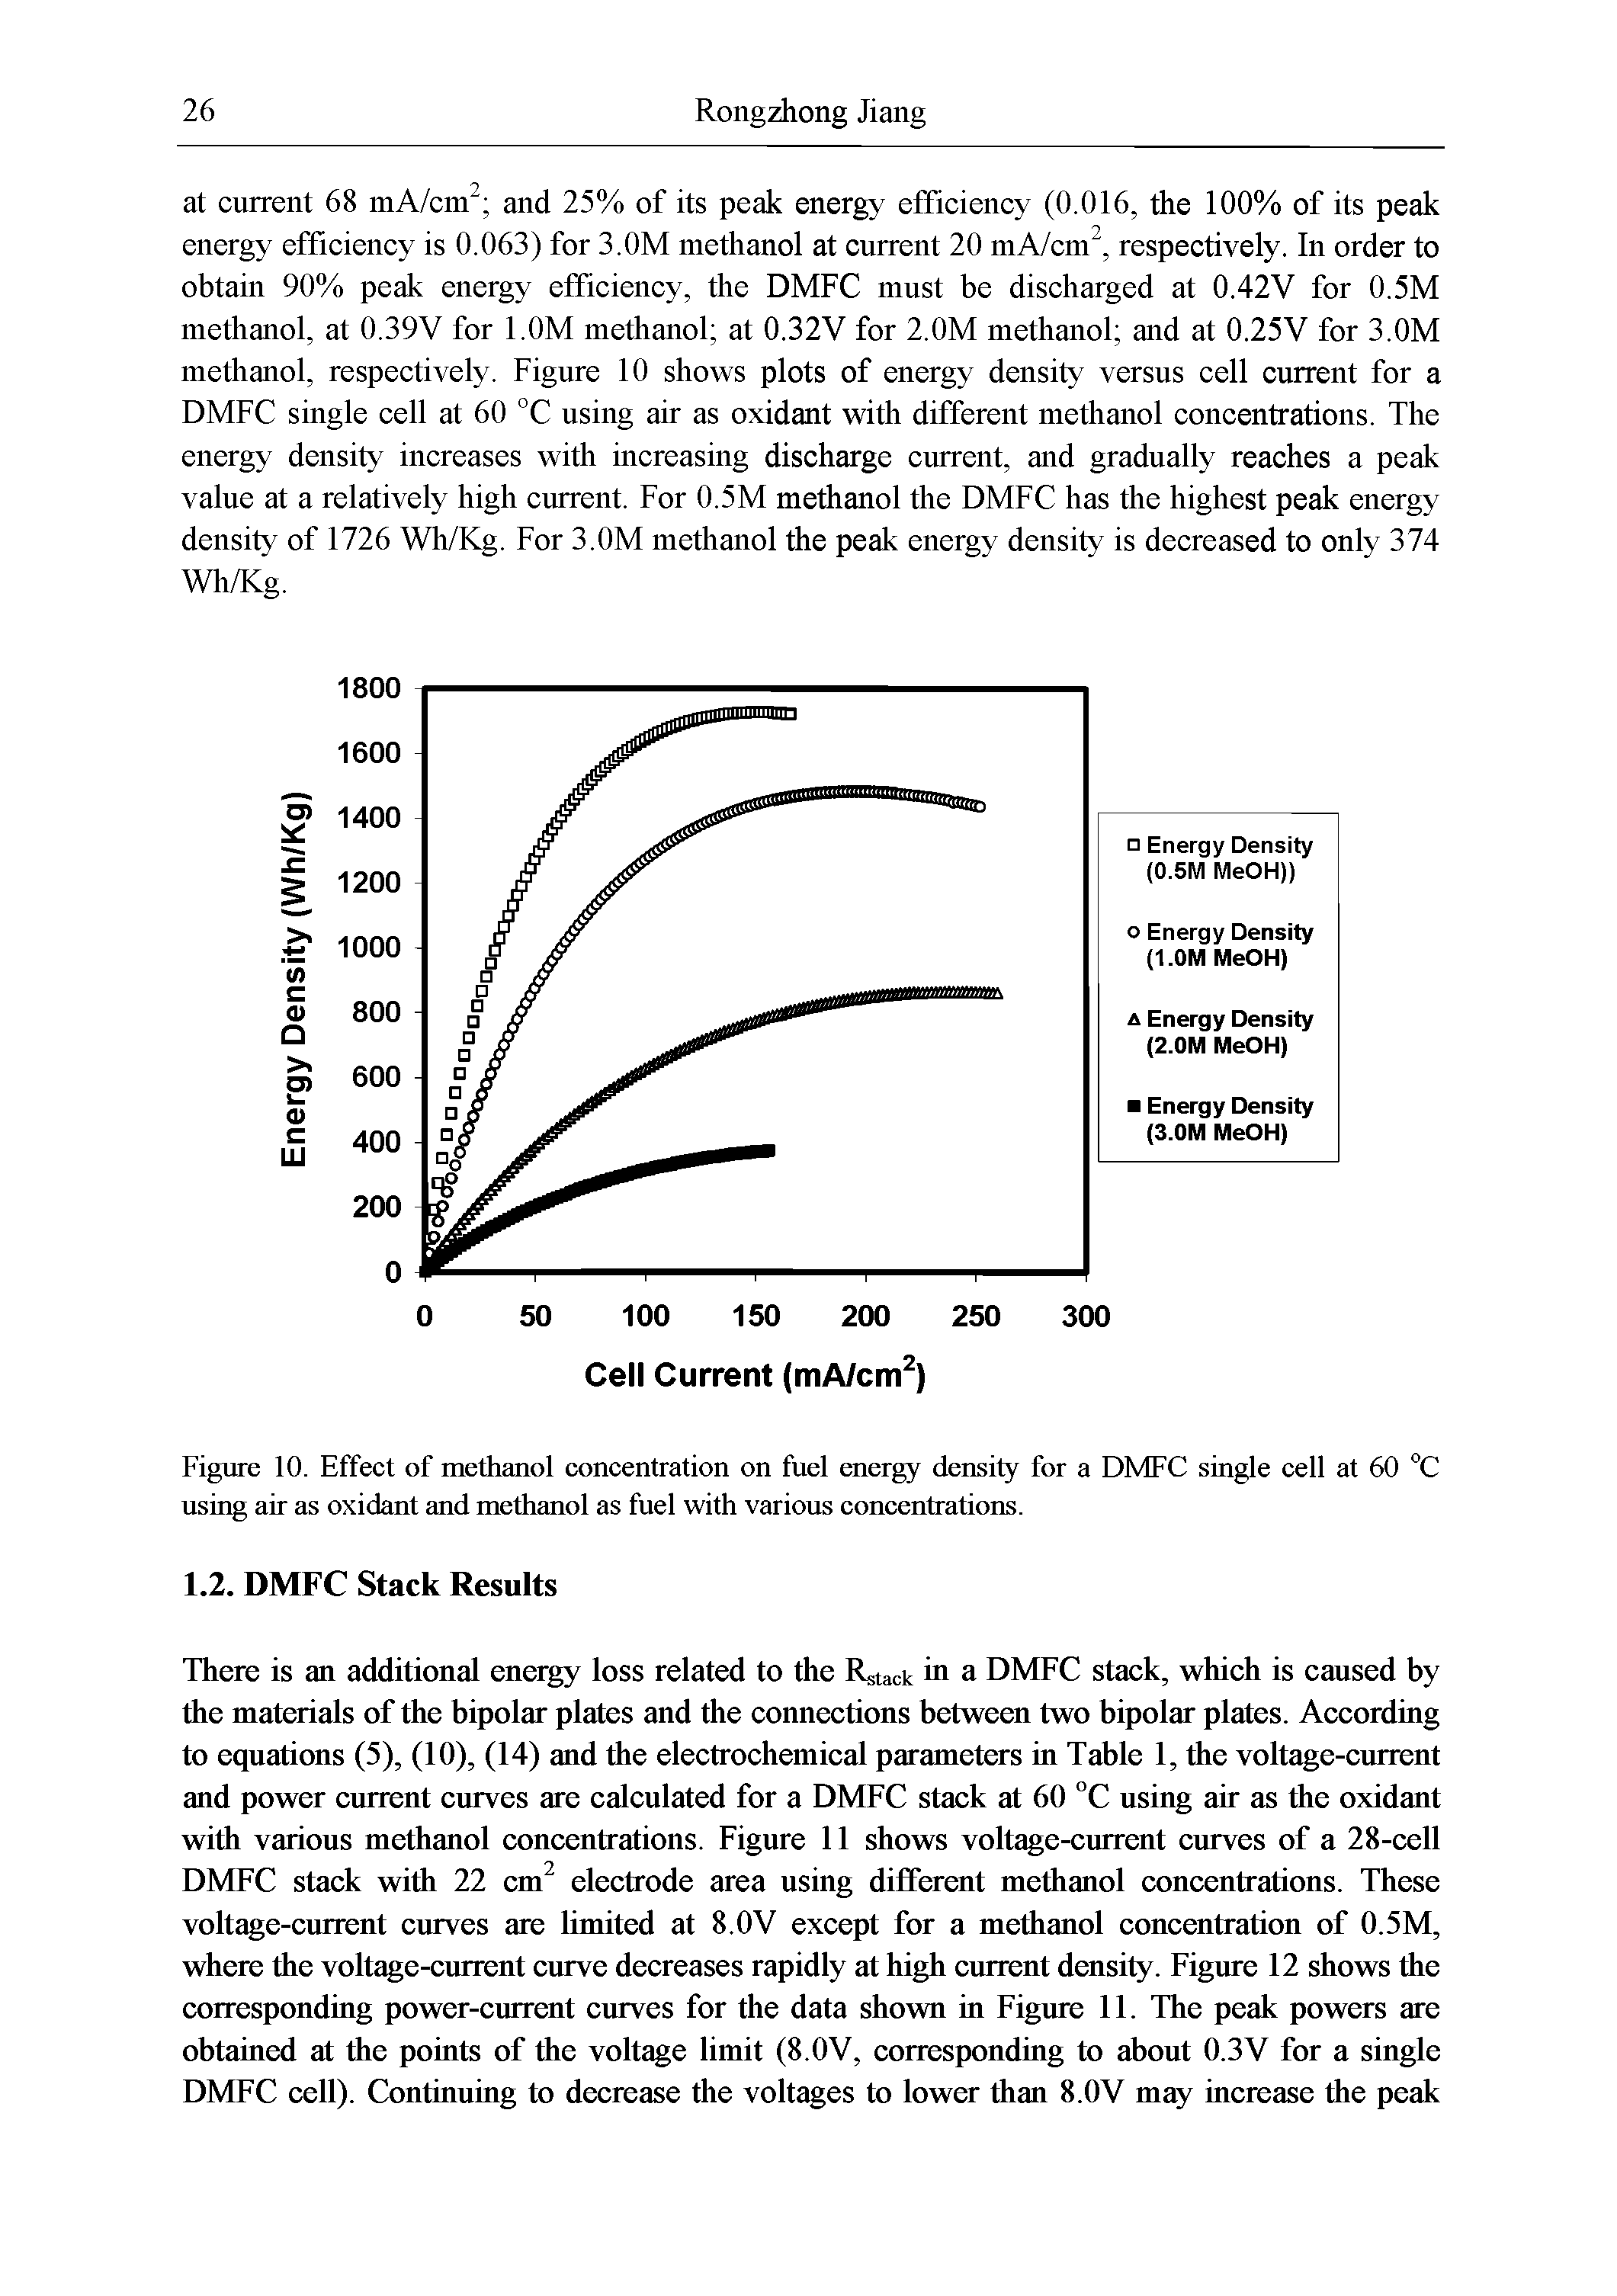 Figure 10. Effect of methanol concentration on fuel energy density for a DMFC single cell at 60 C using air as oxidant and methanol as fuel with various concentrations.